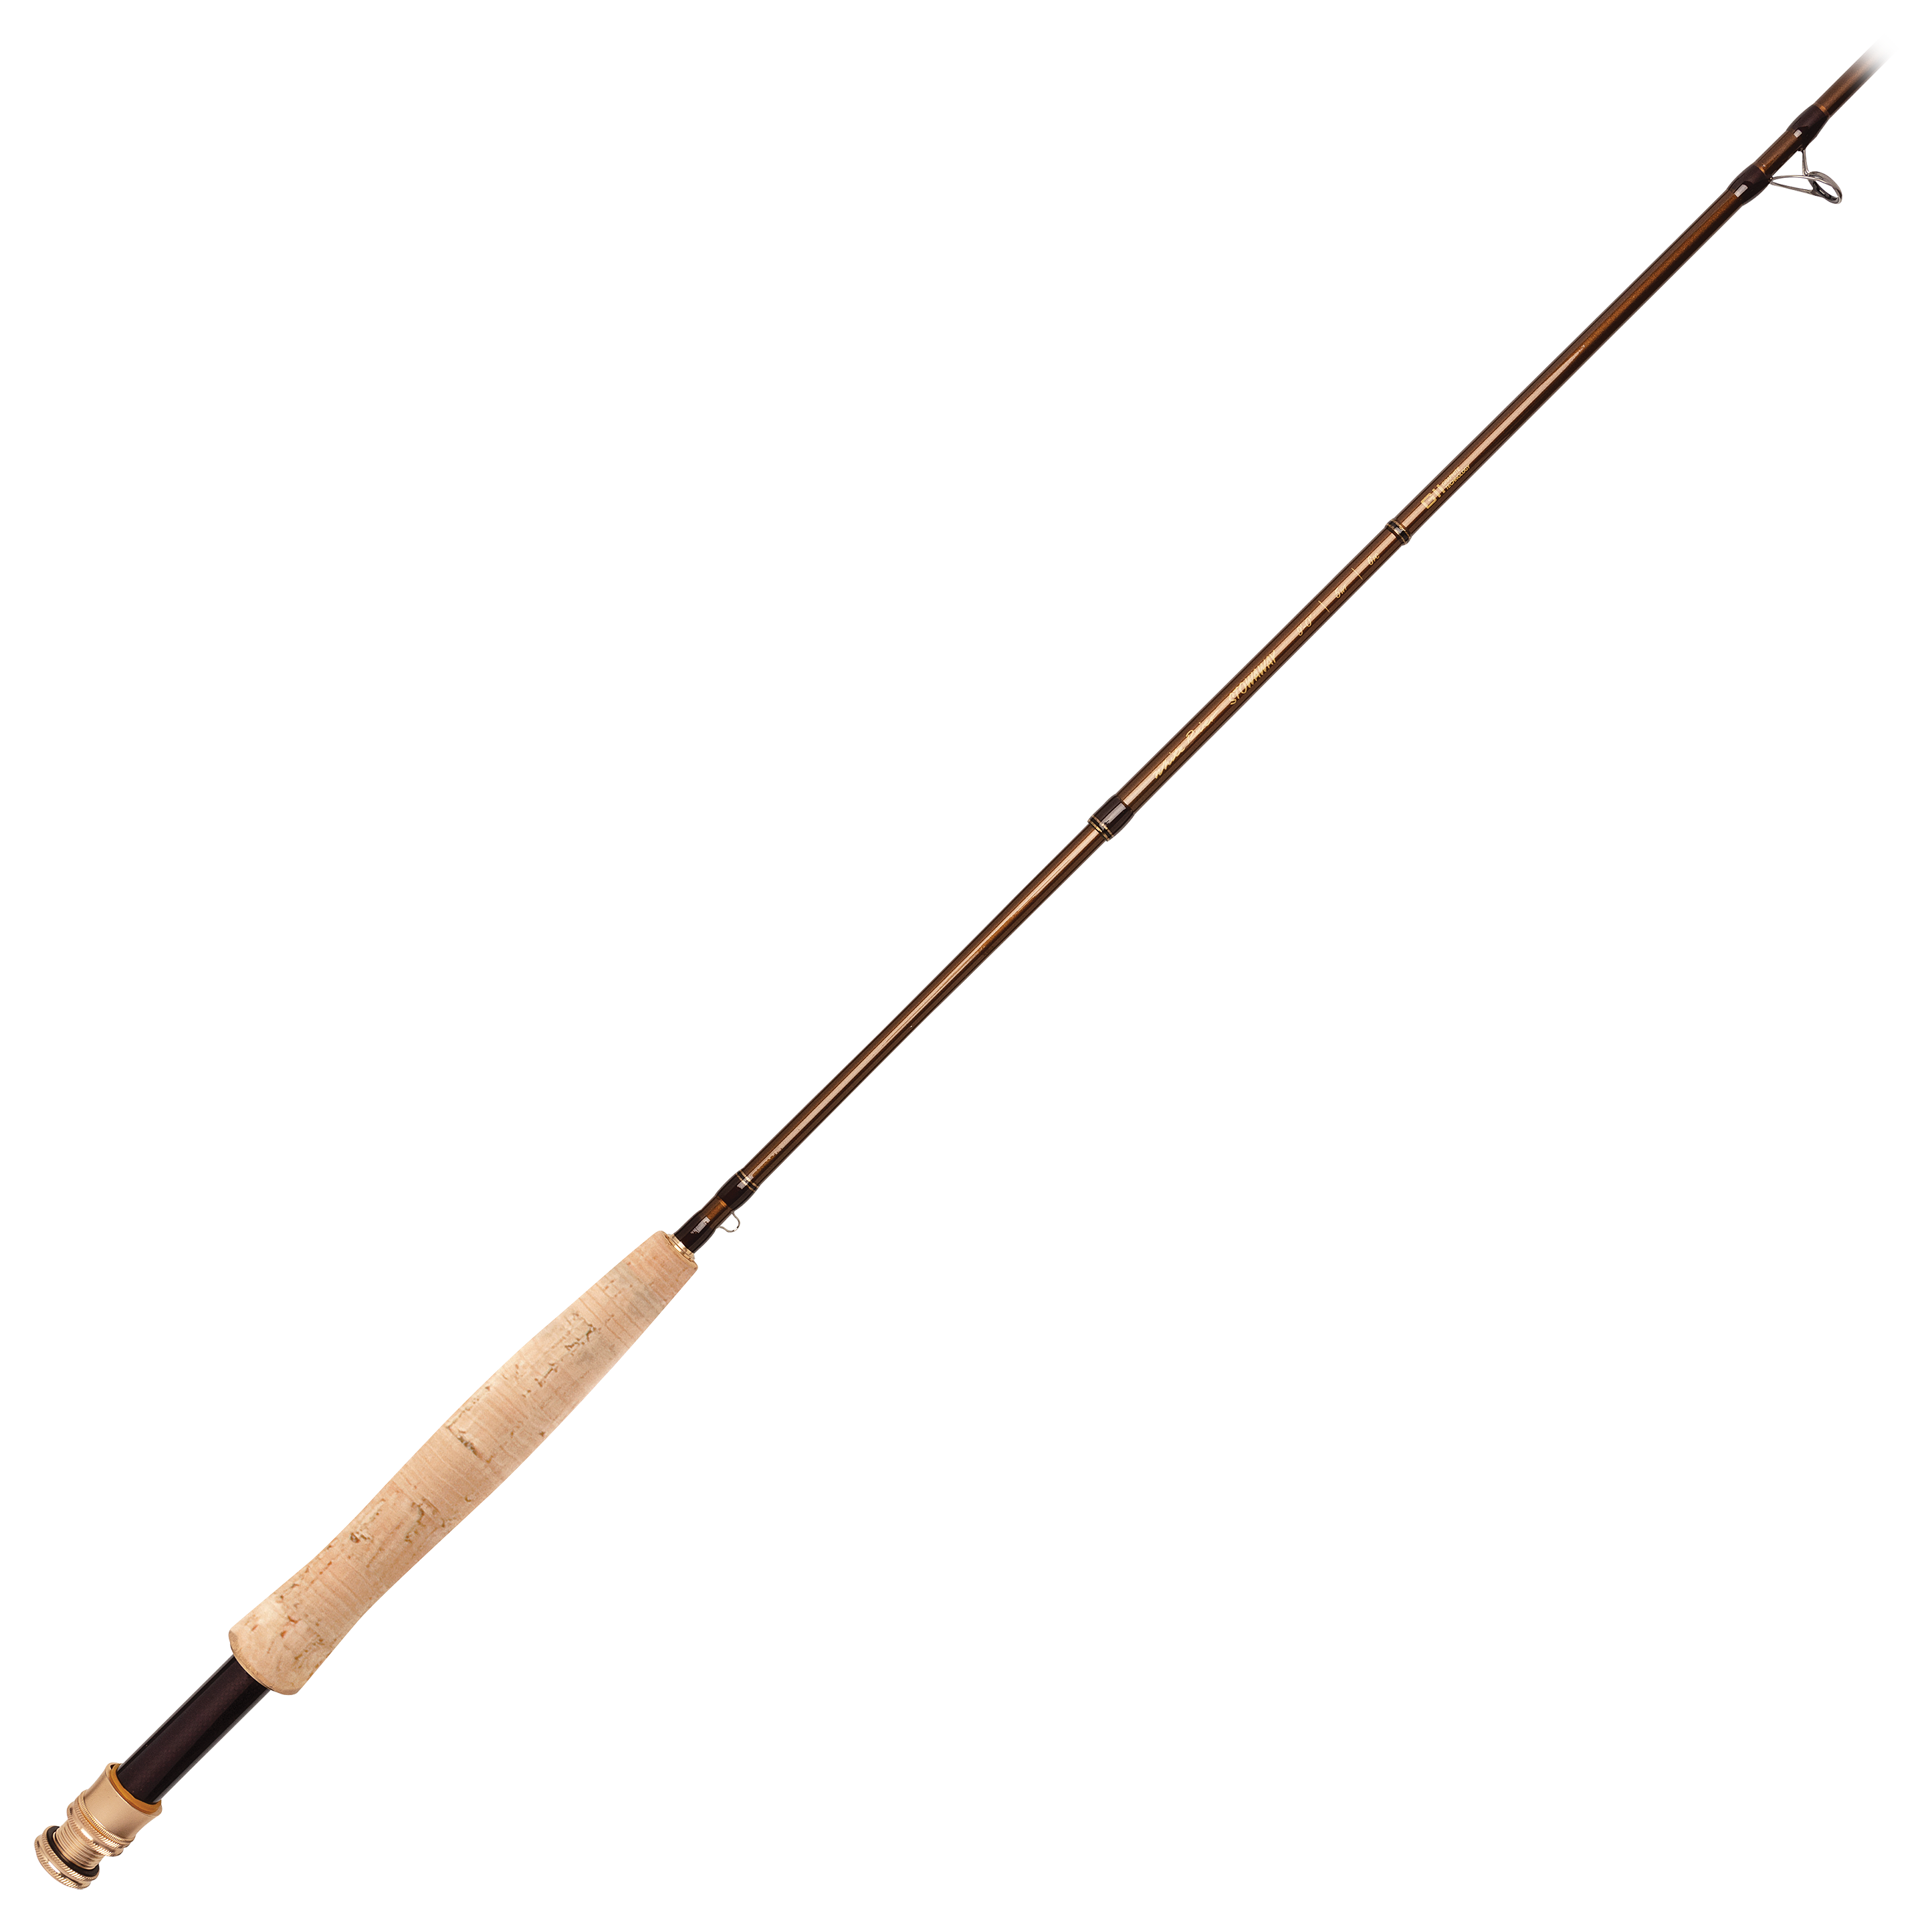 White River Fly Shop Stowaway Fly Rod - WRST863-6